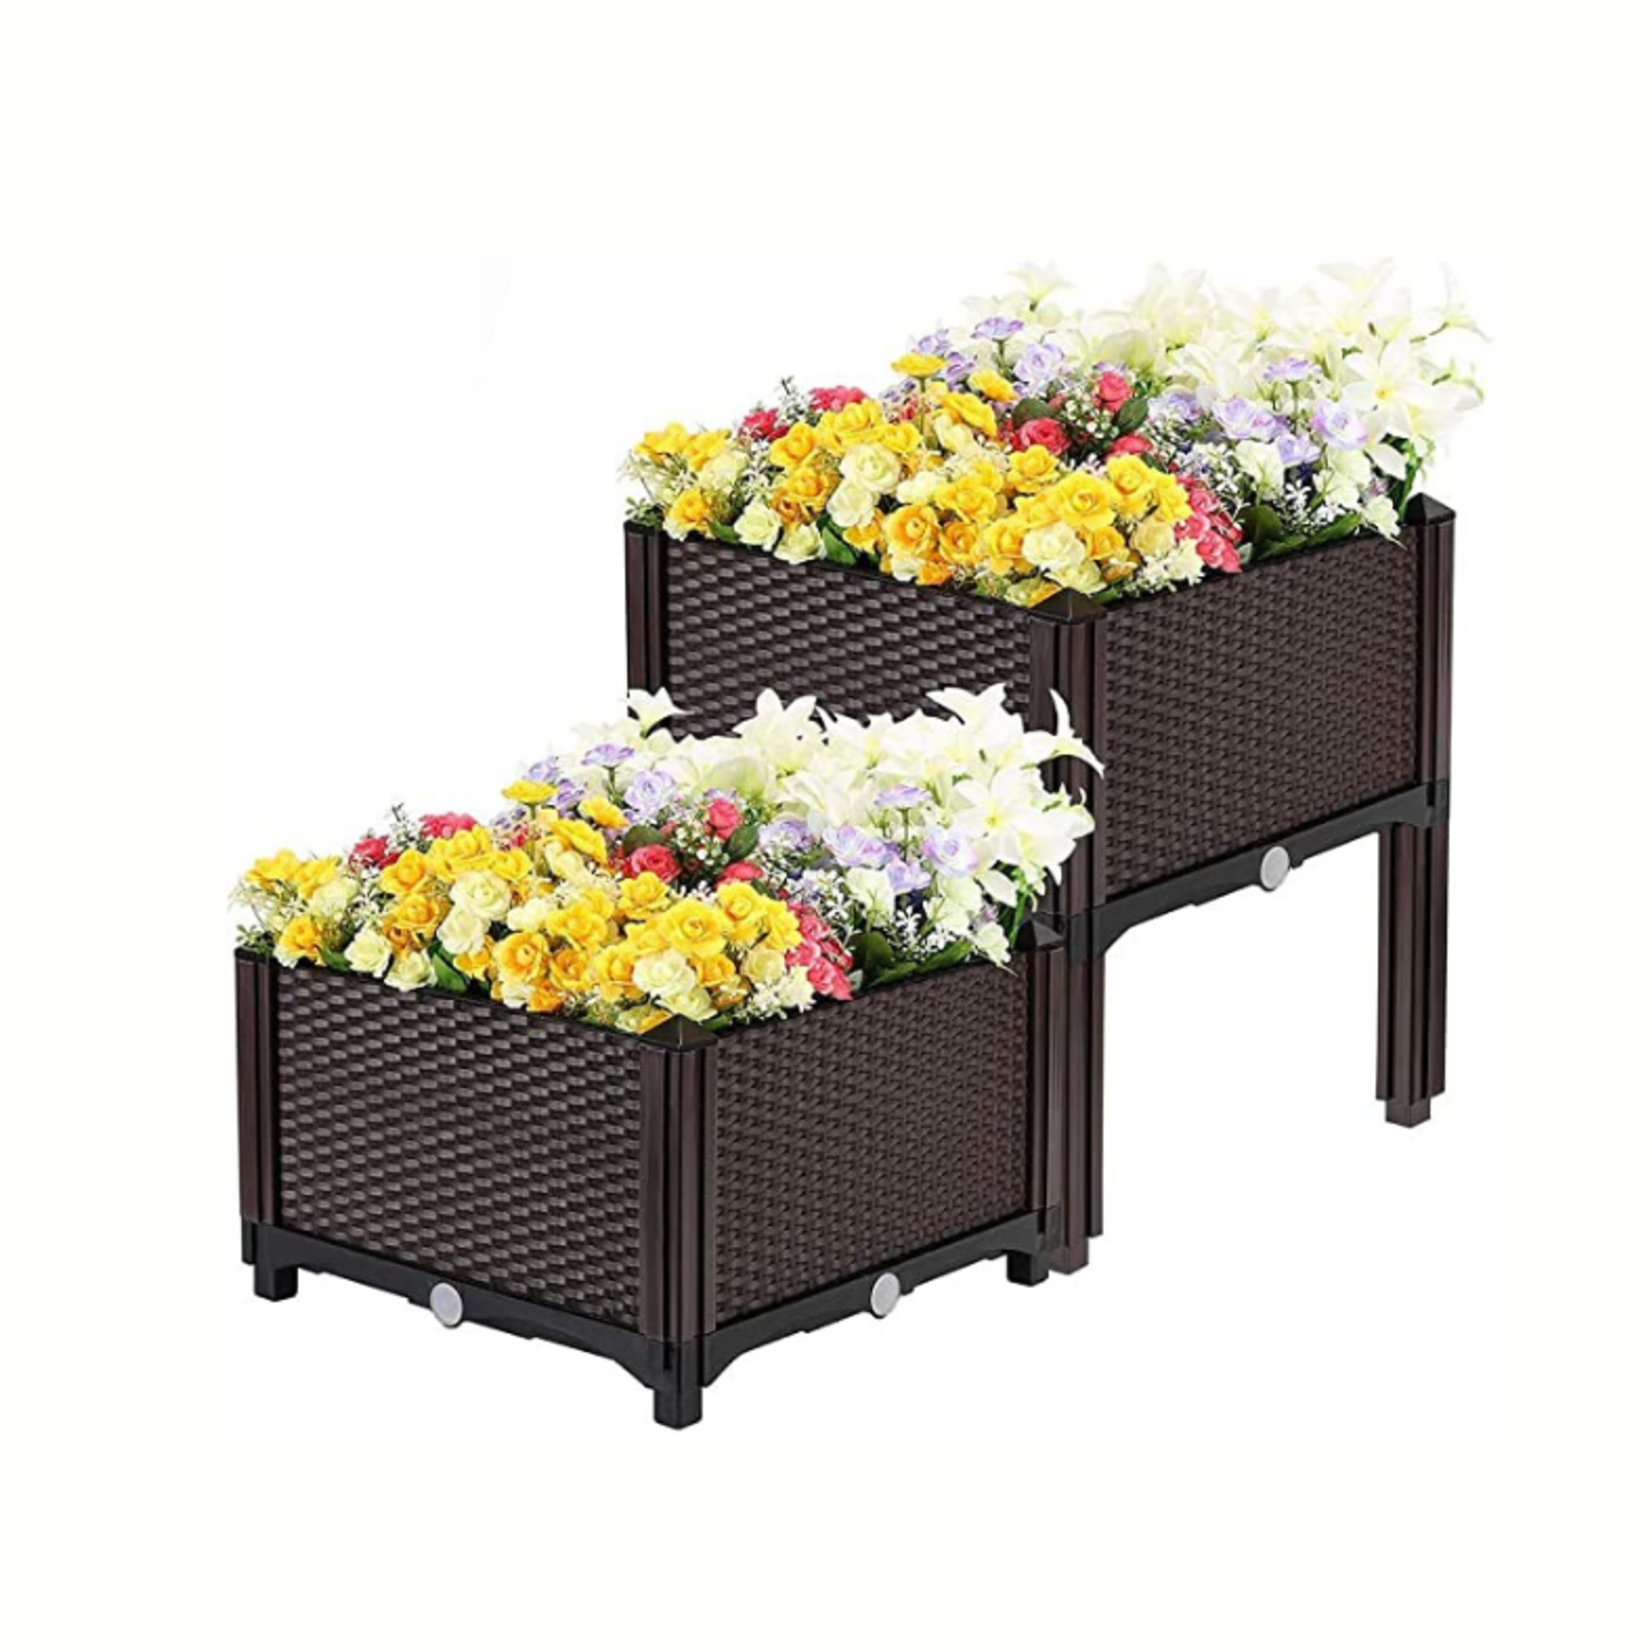 Vivohome Elevated Plastic Raised Garden Bed - Set of 2